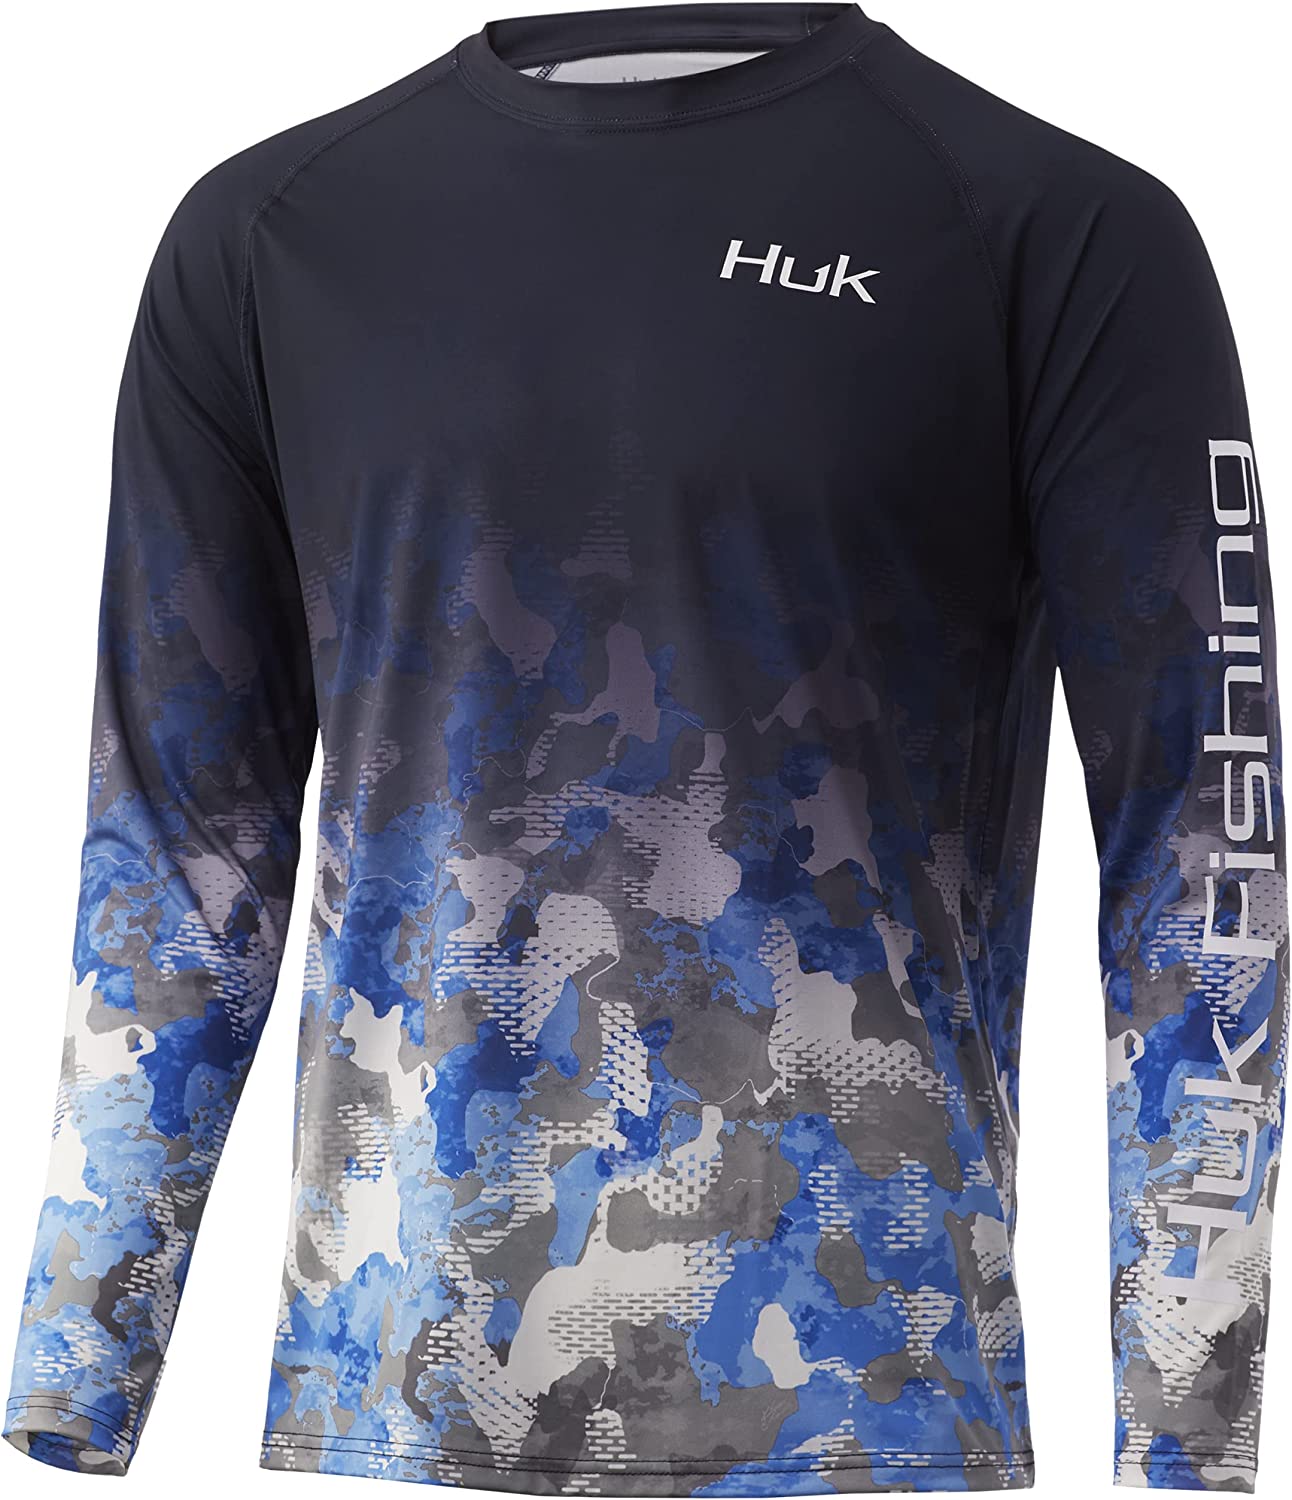 Huk Refraction Fish Fade Vented Performance Men’s Shirt Ice Boat / XL